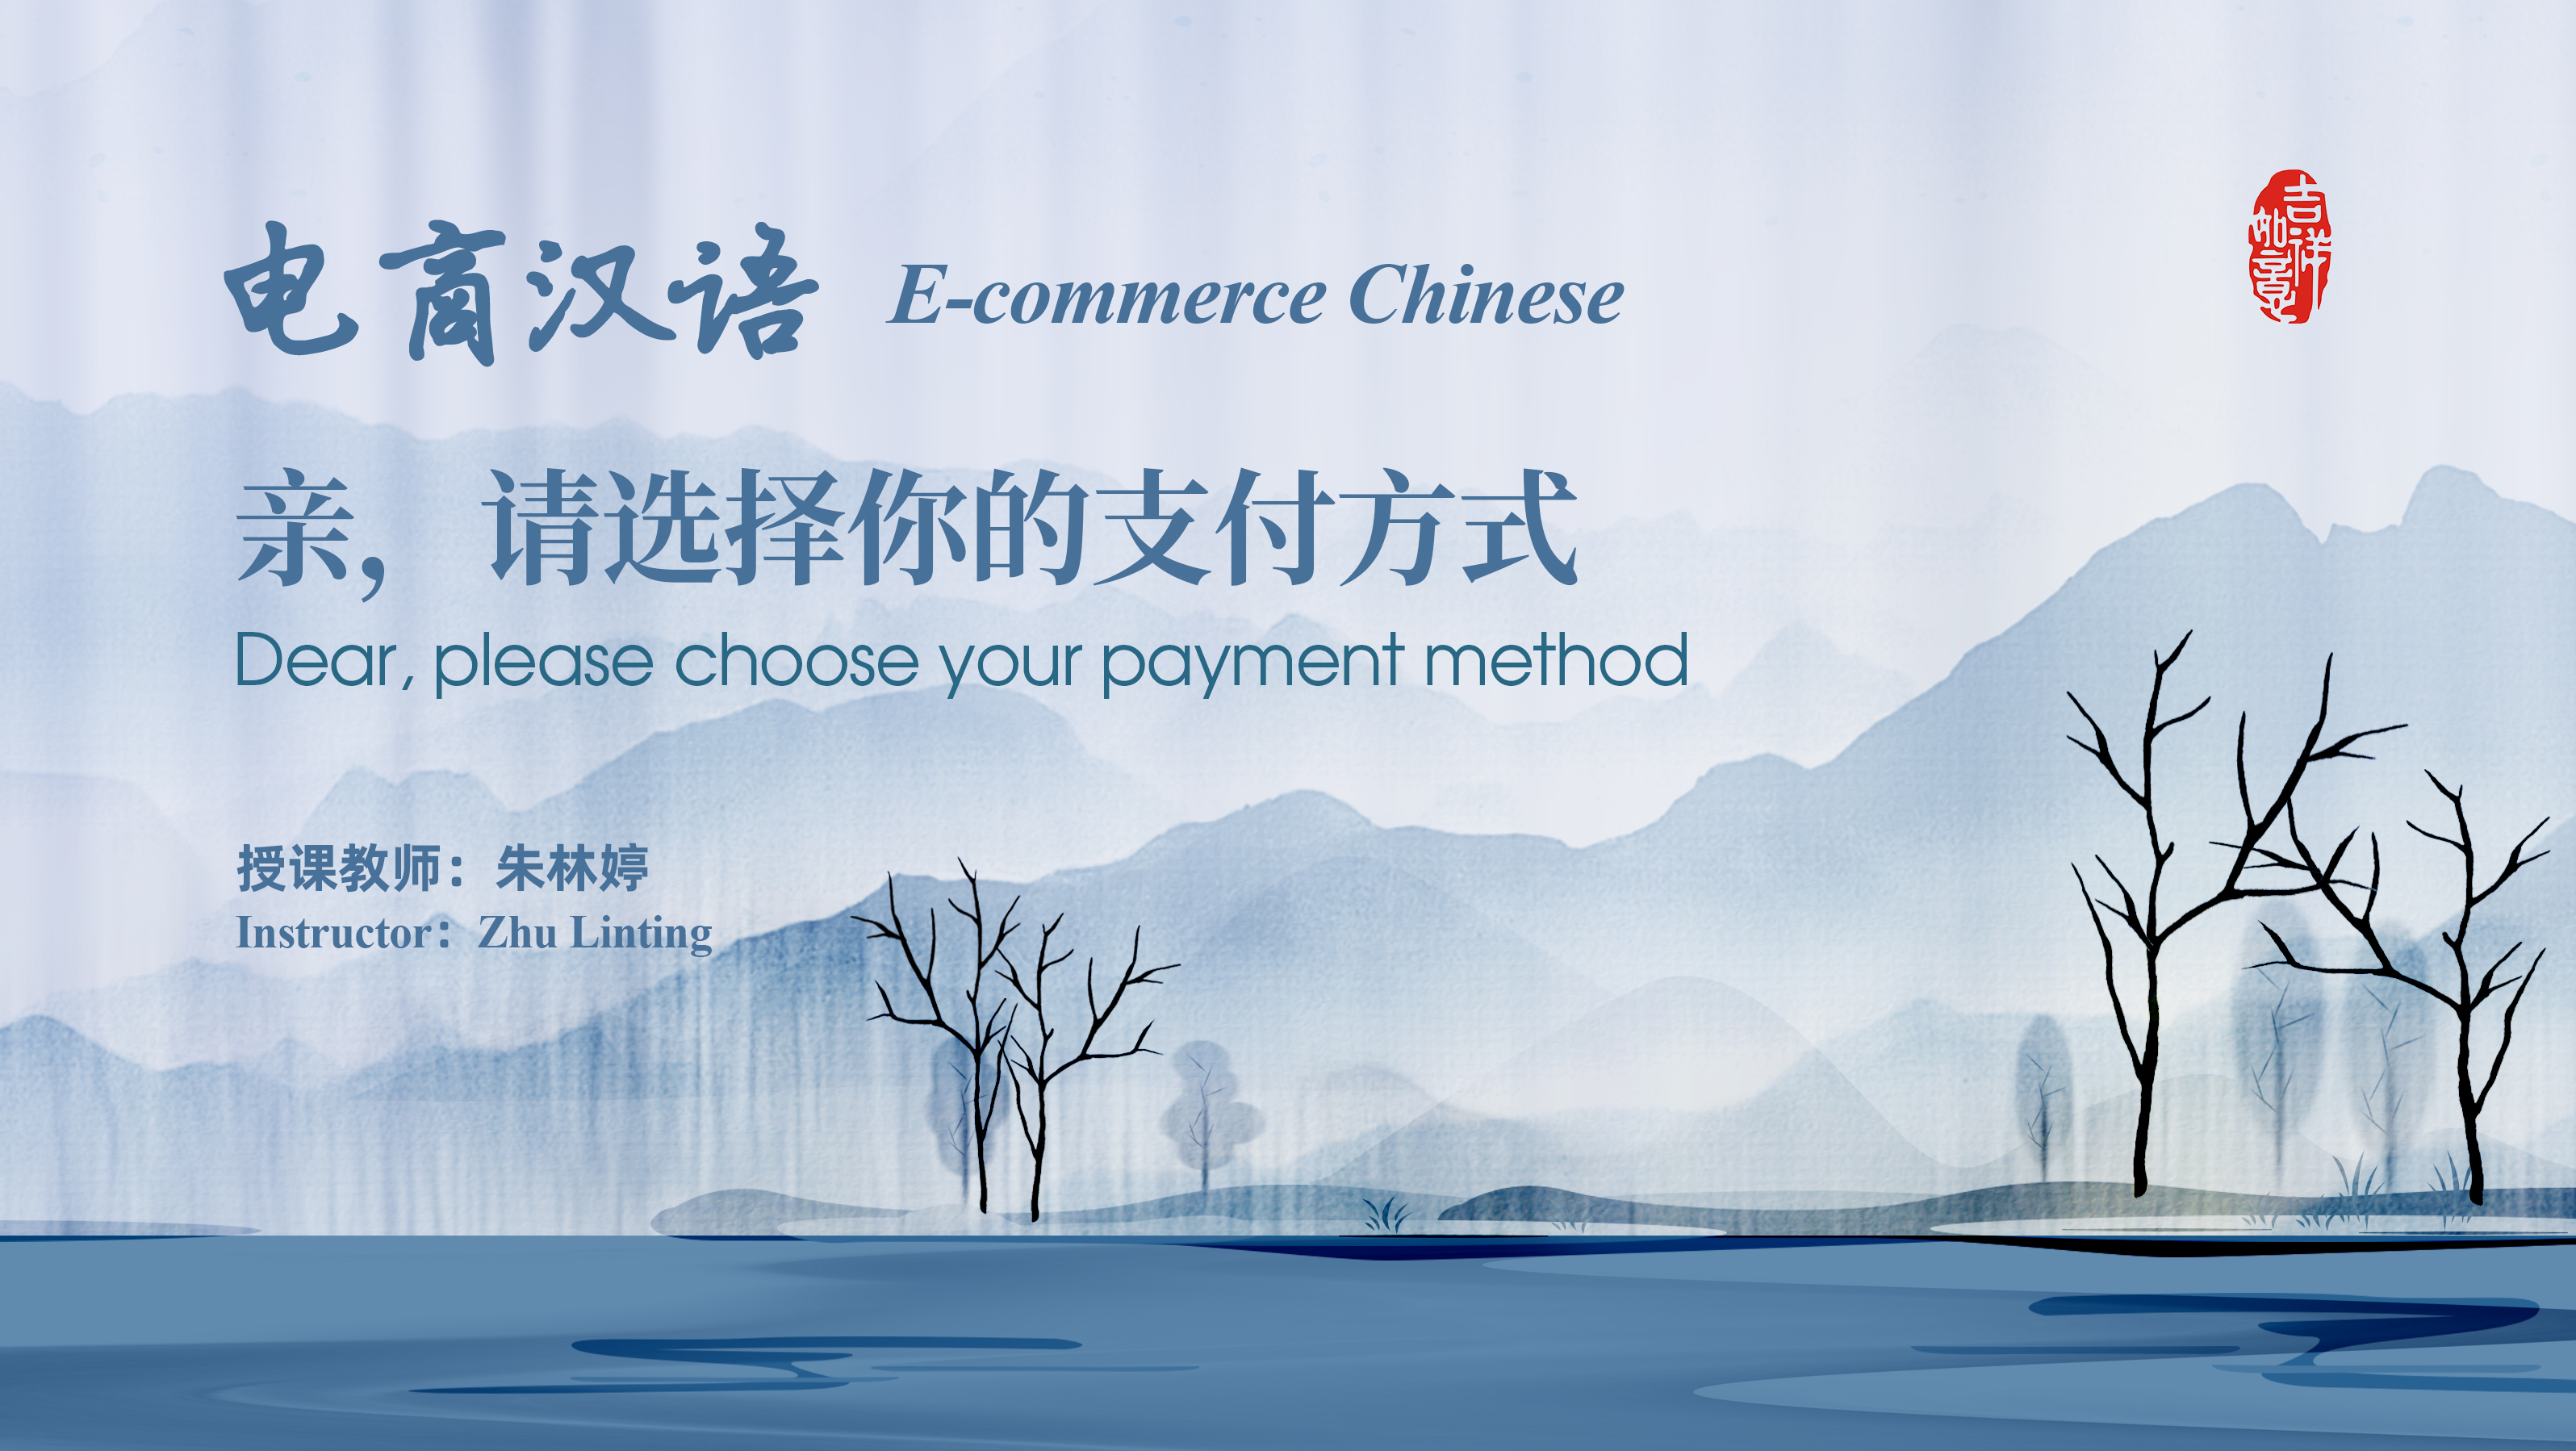 E-commerce Chinese Dear, please choose  your payment method